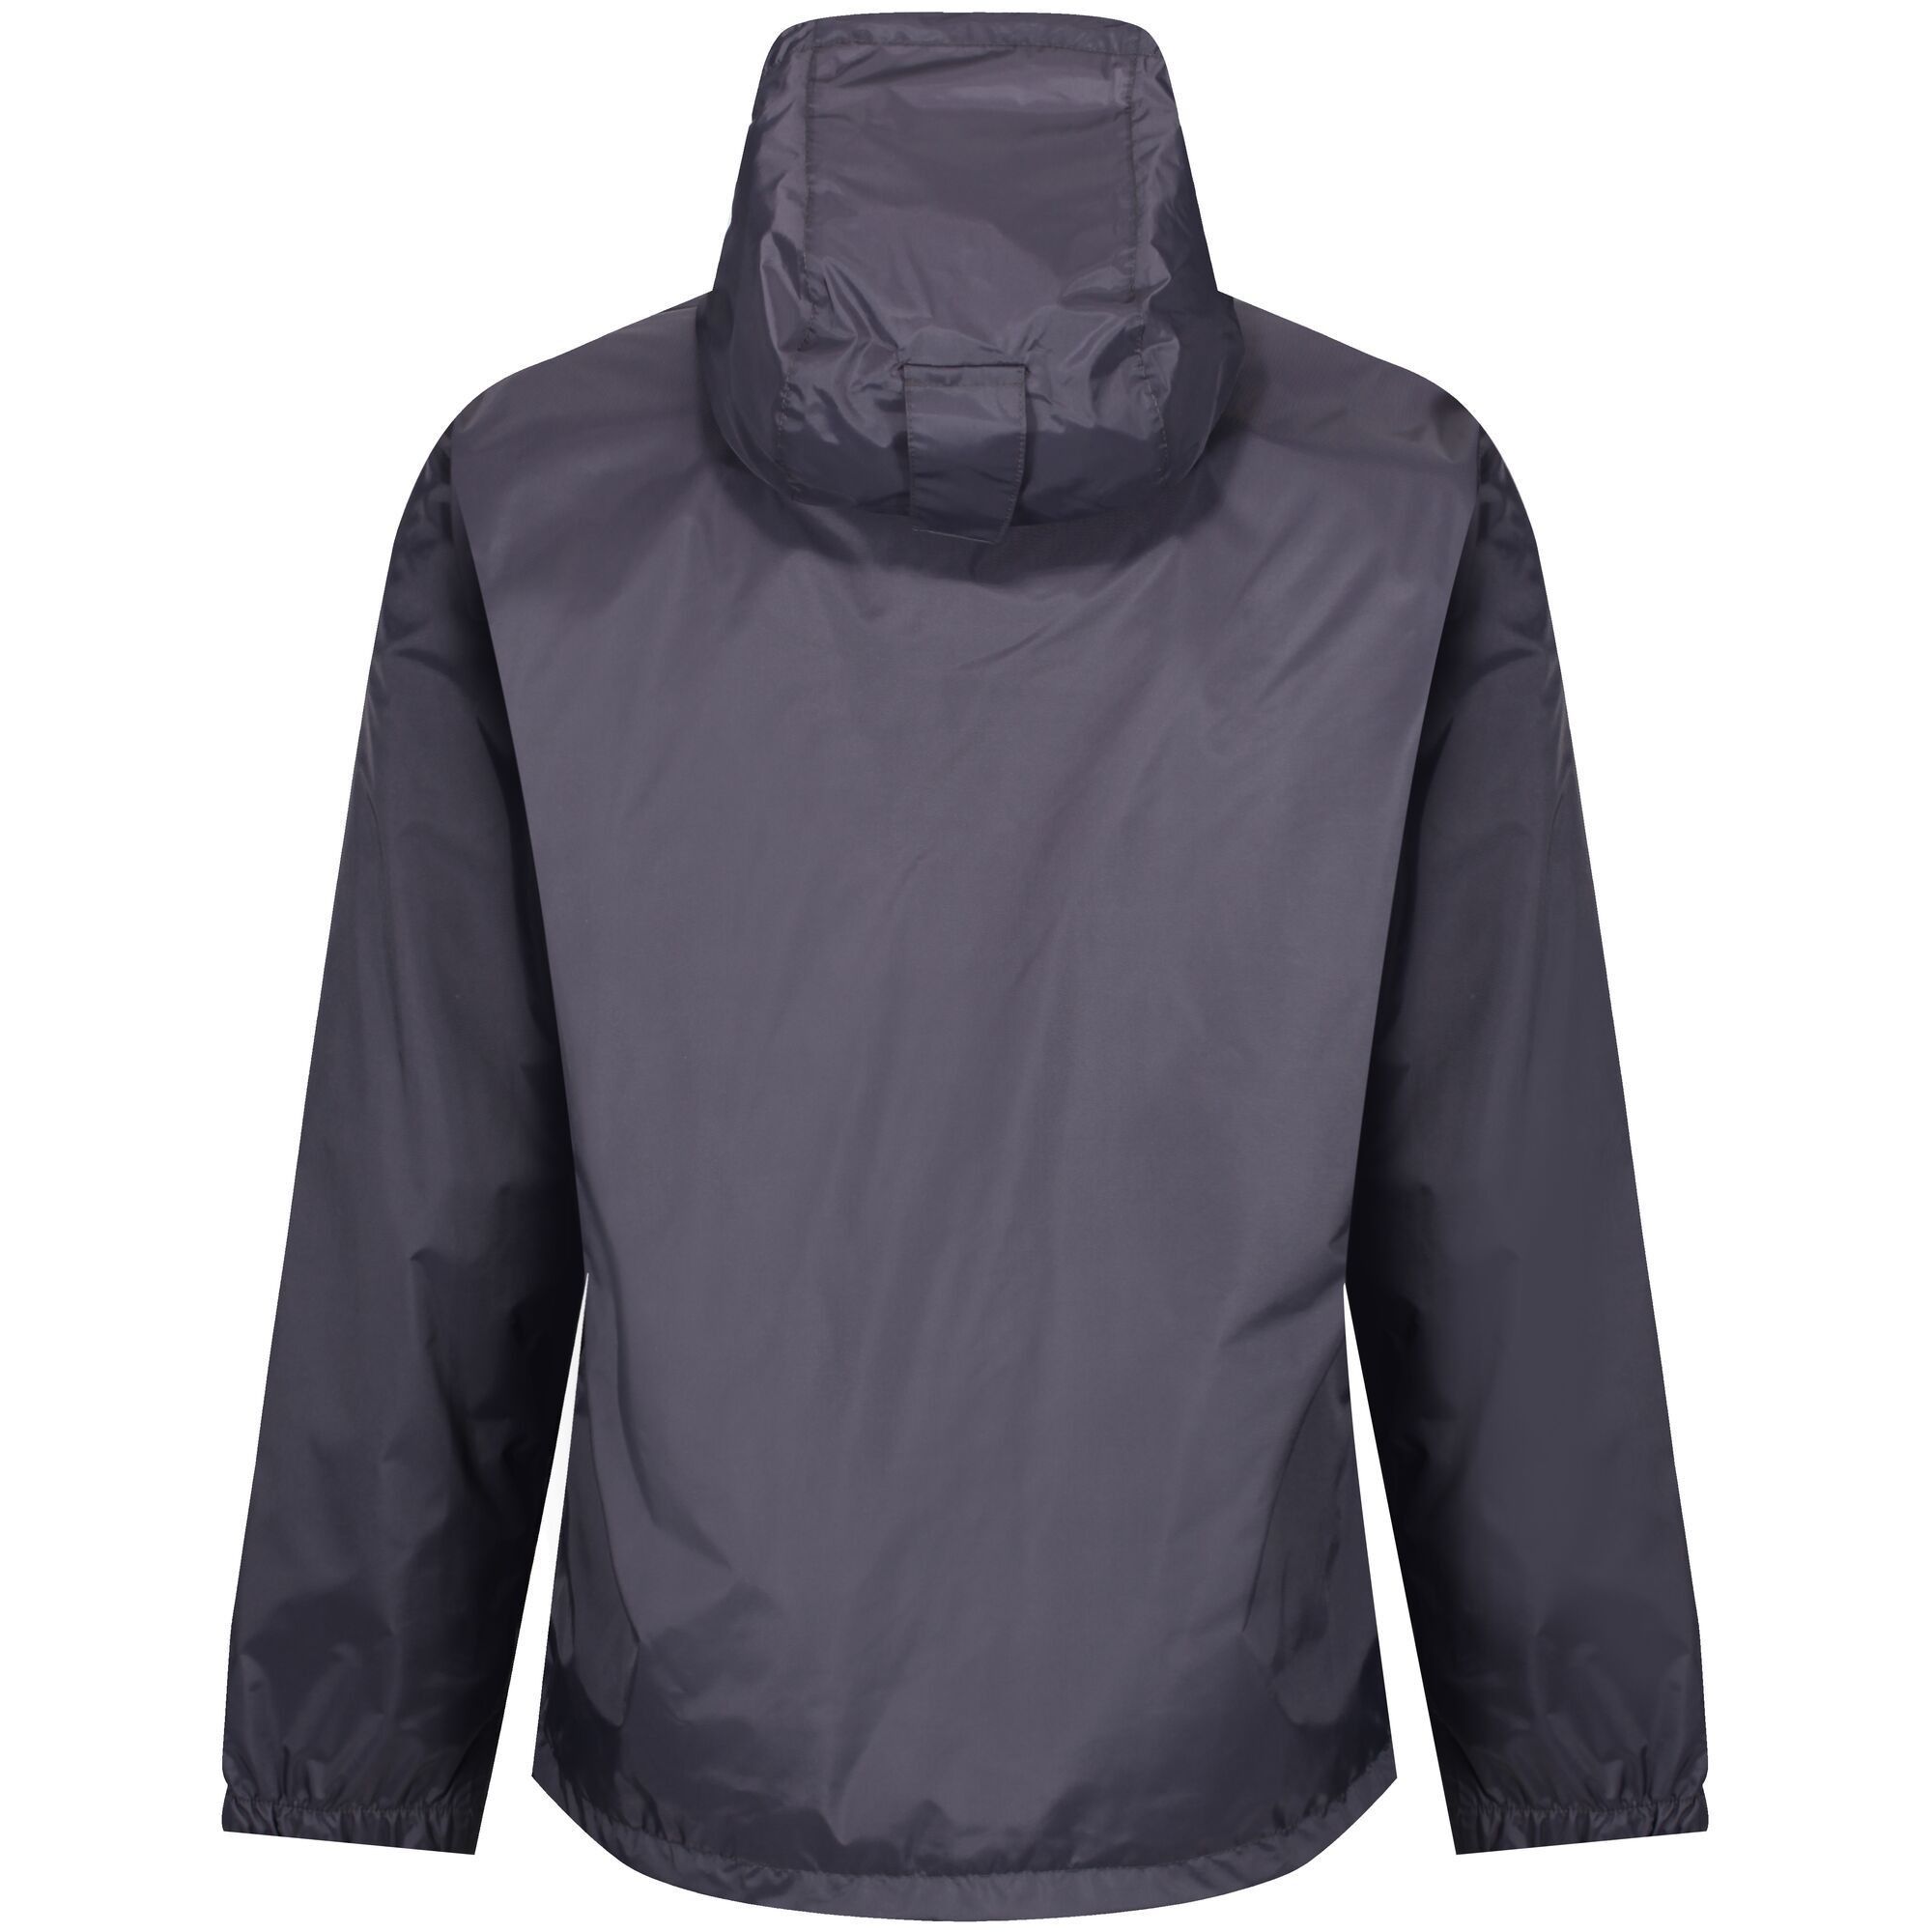 100% Polyamide. Waterproof hooded jacket with elasticated cuffs. Ideal for wet weather. Hand wash. Size Guide (chest): 6 UK: 30in, 8 UK: 32in, 10 UK: 34in, 12 UK: 36in, 14 UK: 38in, 16 UK: 40in, 18 UK: 42in, 20 UK: 45in, 22 UK: 48in, 24 UK: 50in, 26 UK: 52in, 28 UK: 54in.